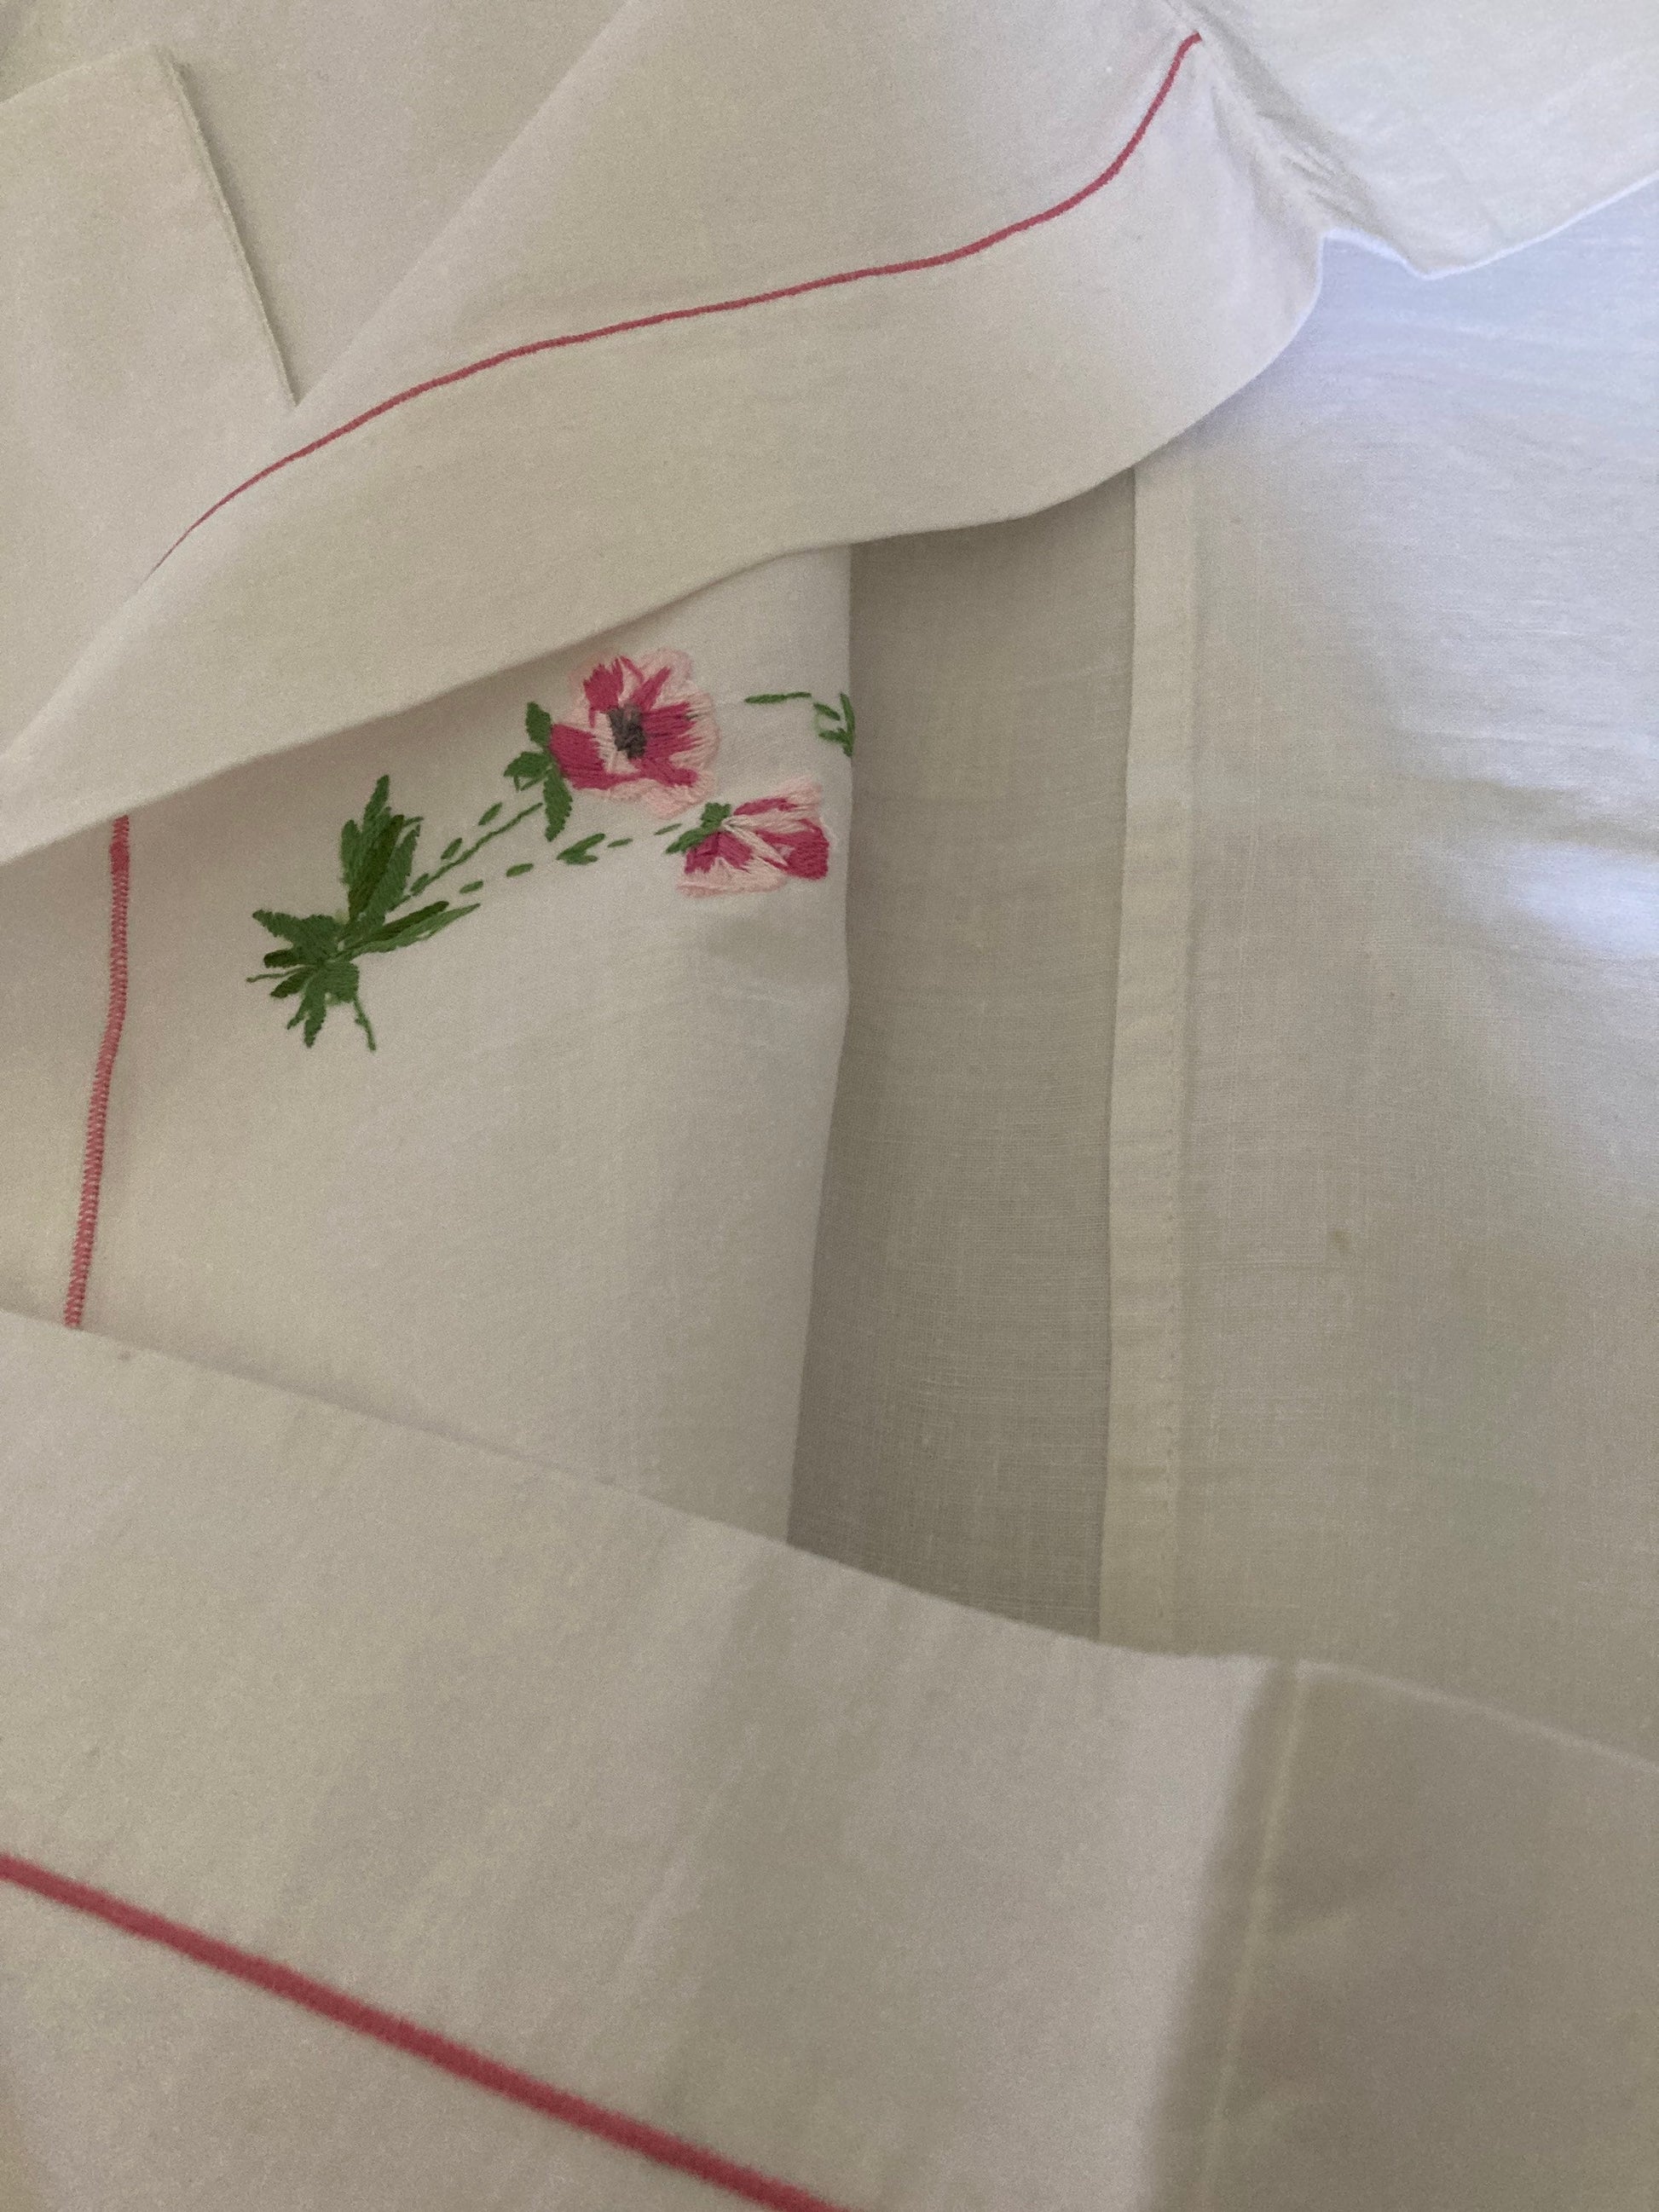 Pair pillowcases bedding white cotton embroidered floral flower 29 x 19 pink green